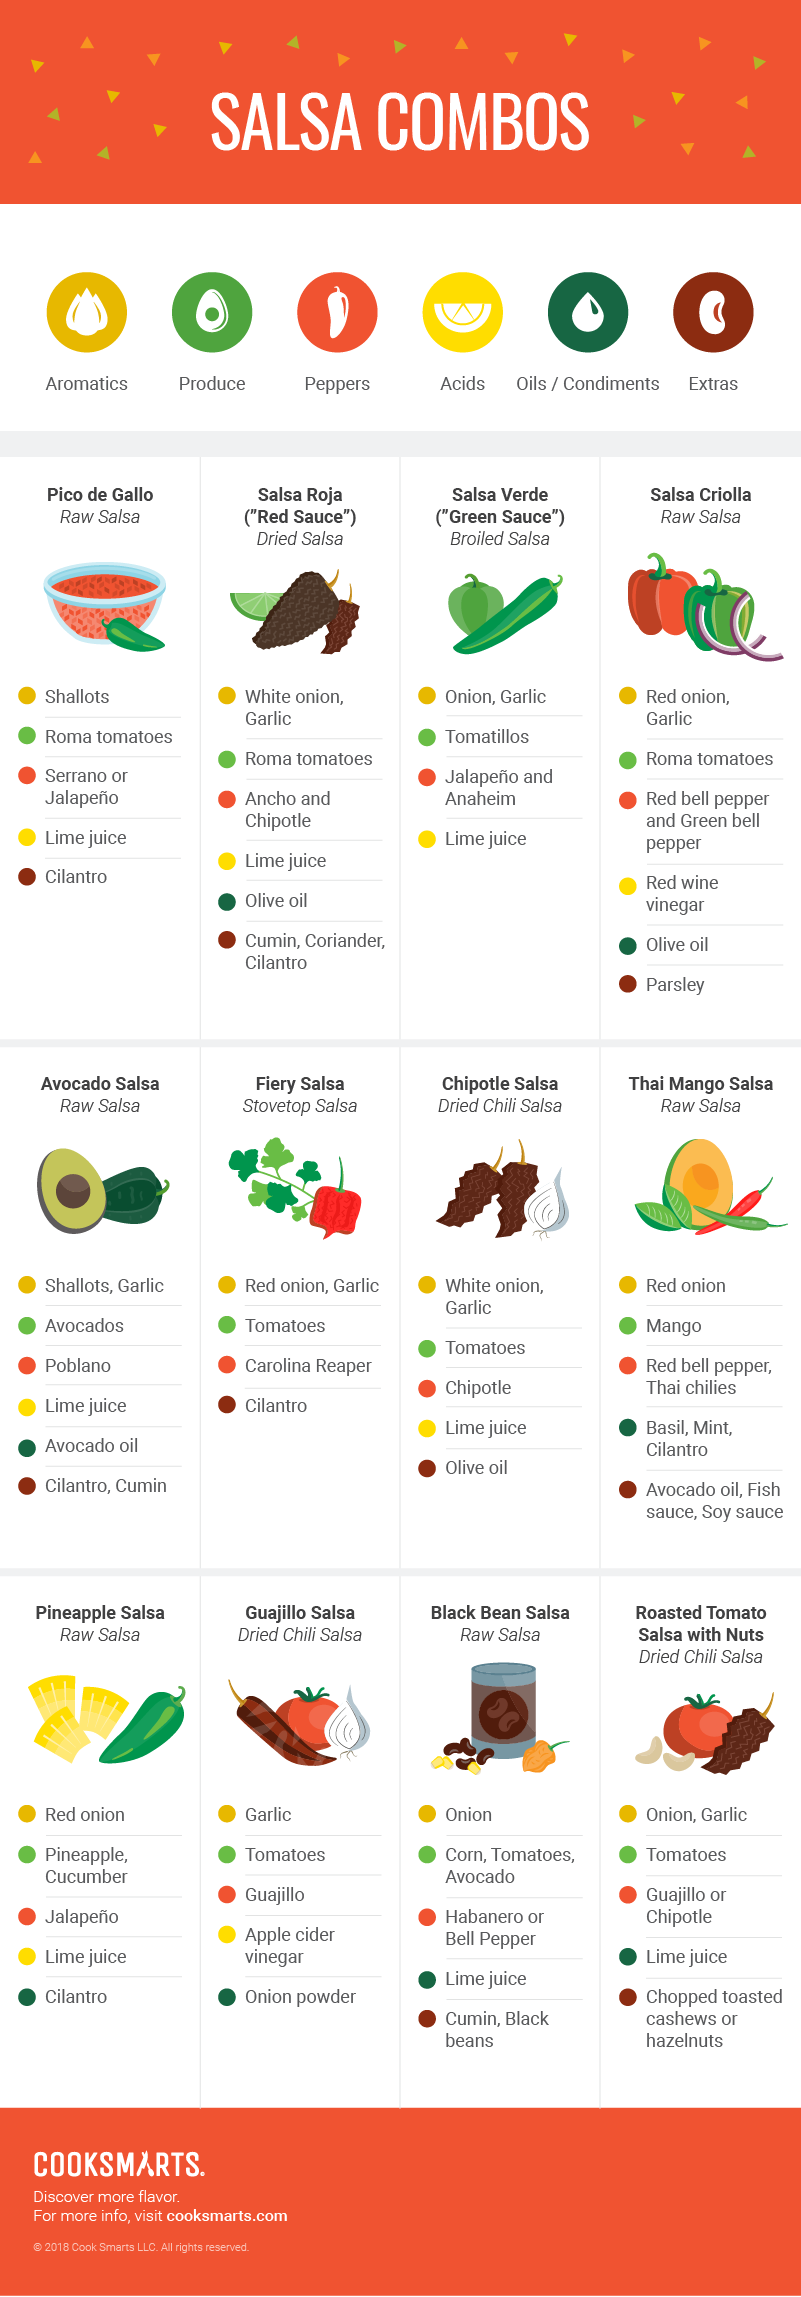 Salsa Combo Recipes [Infographic] | Cook Smarts